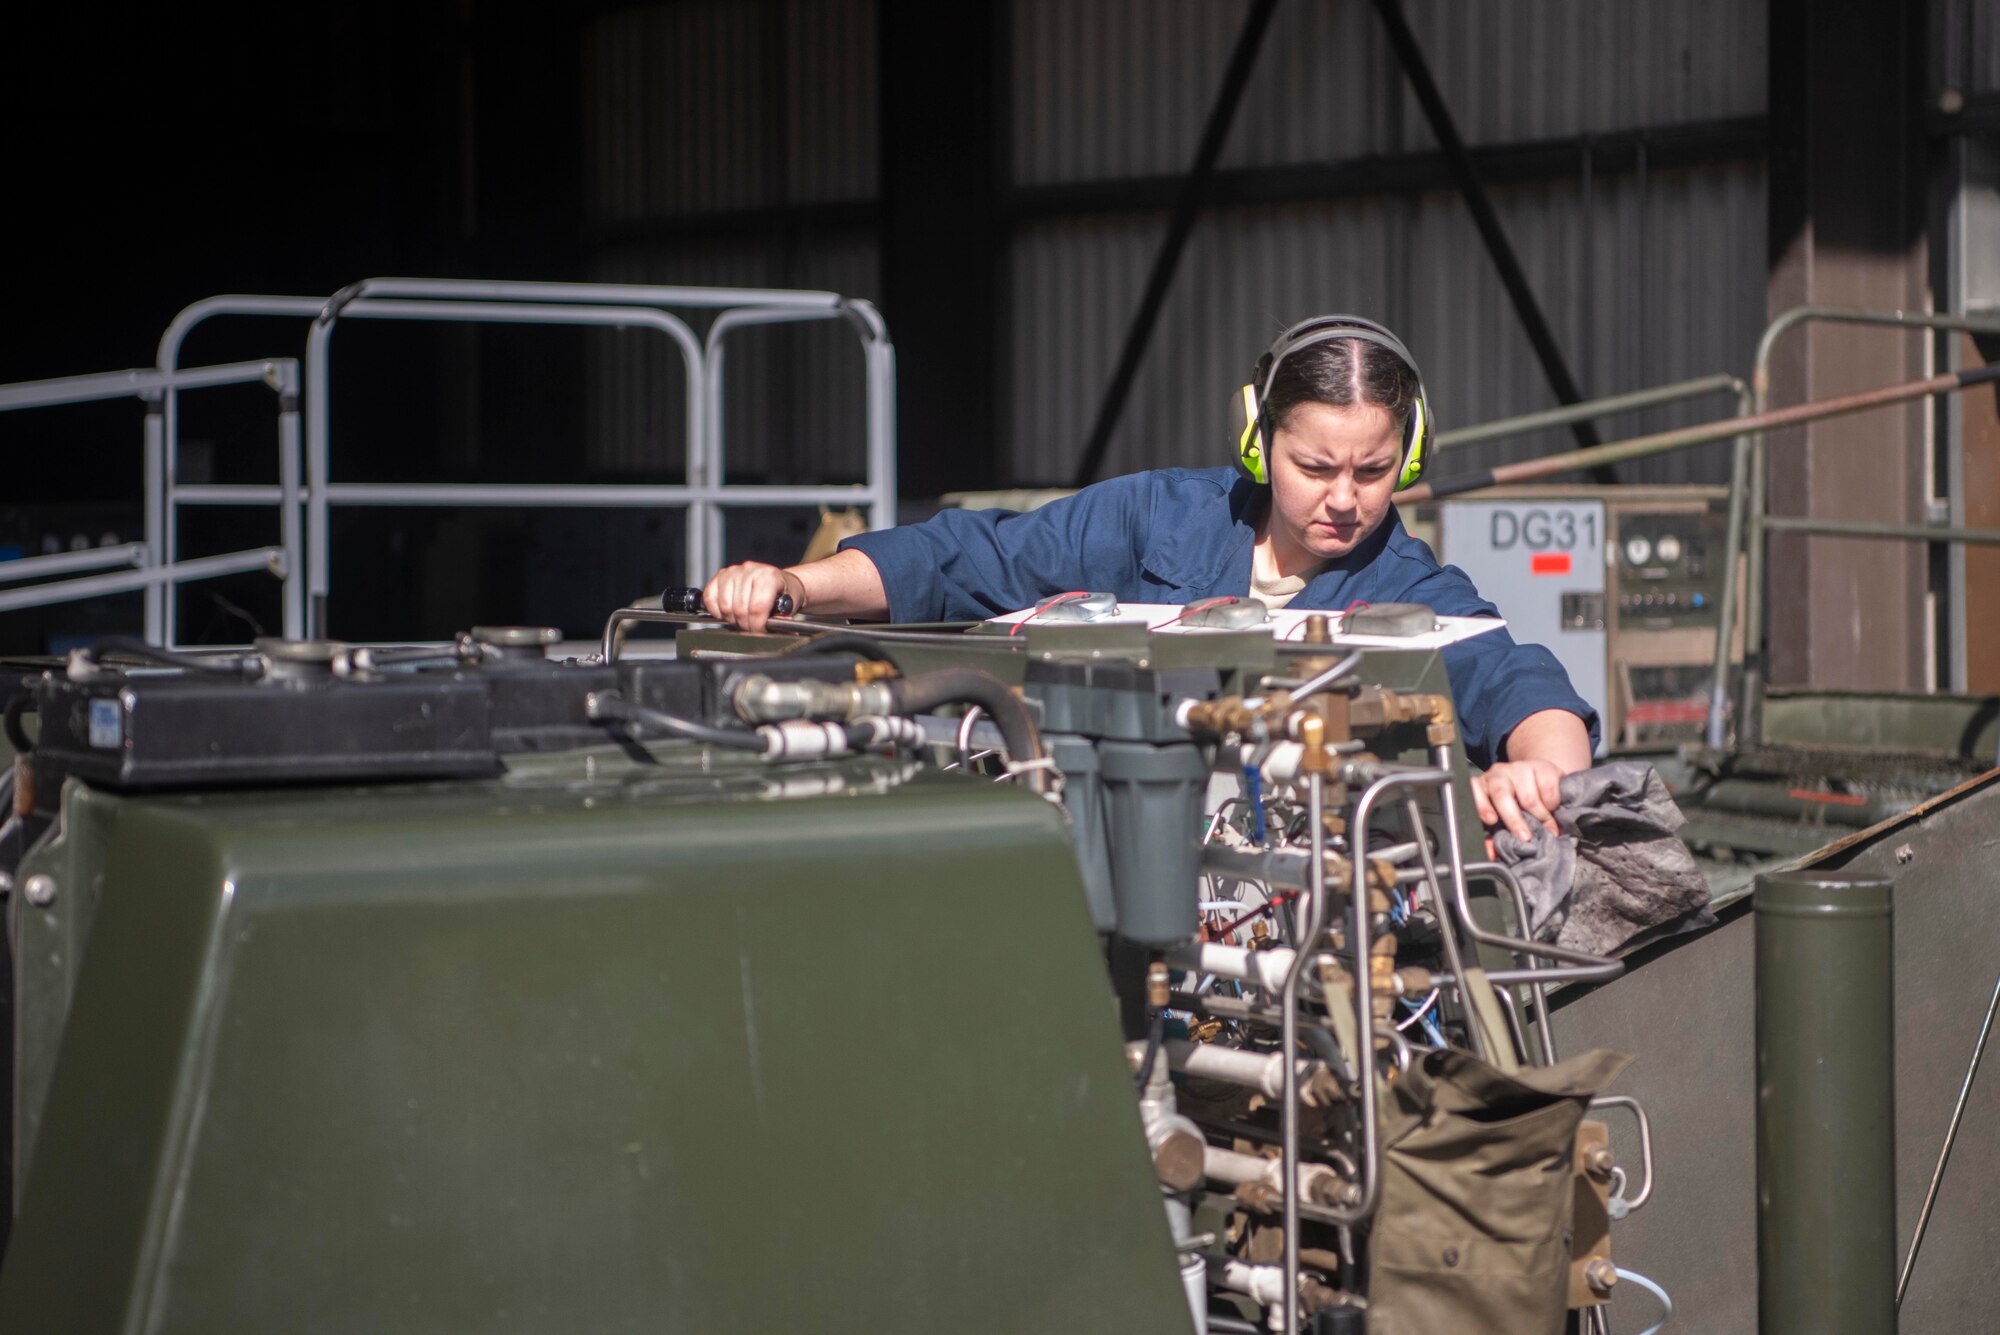 Airman working with equipment